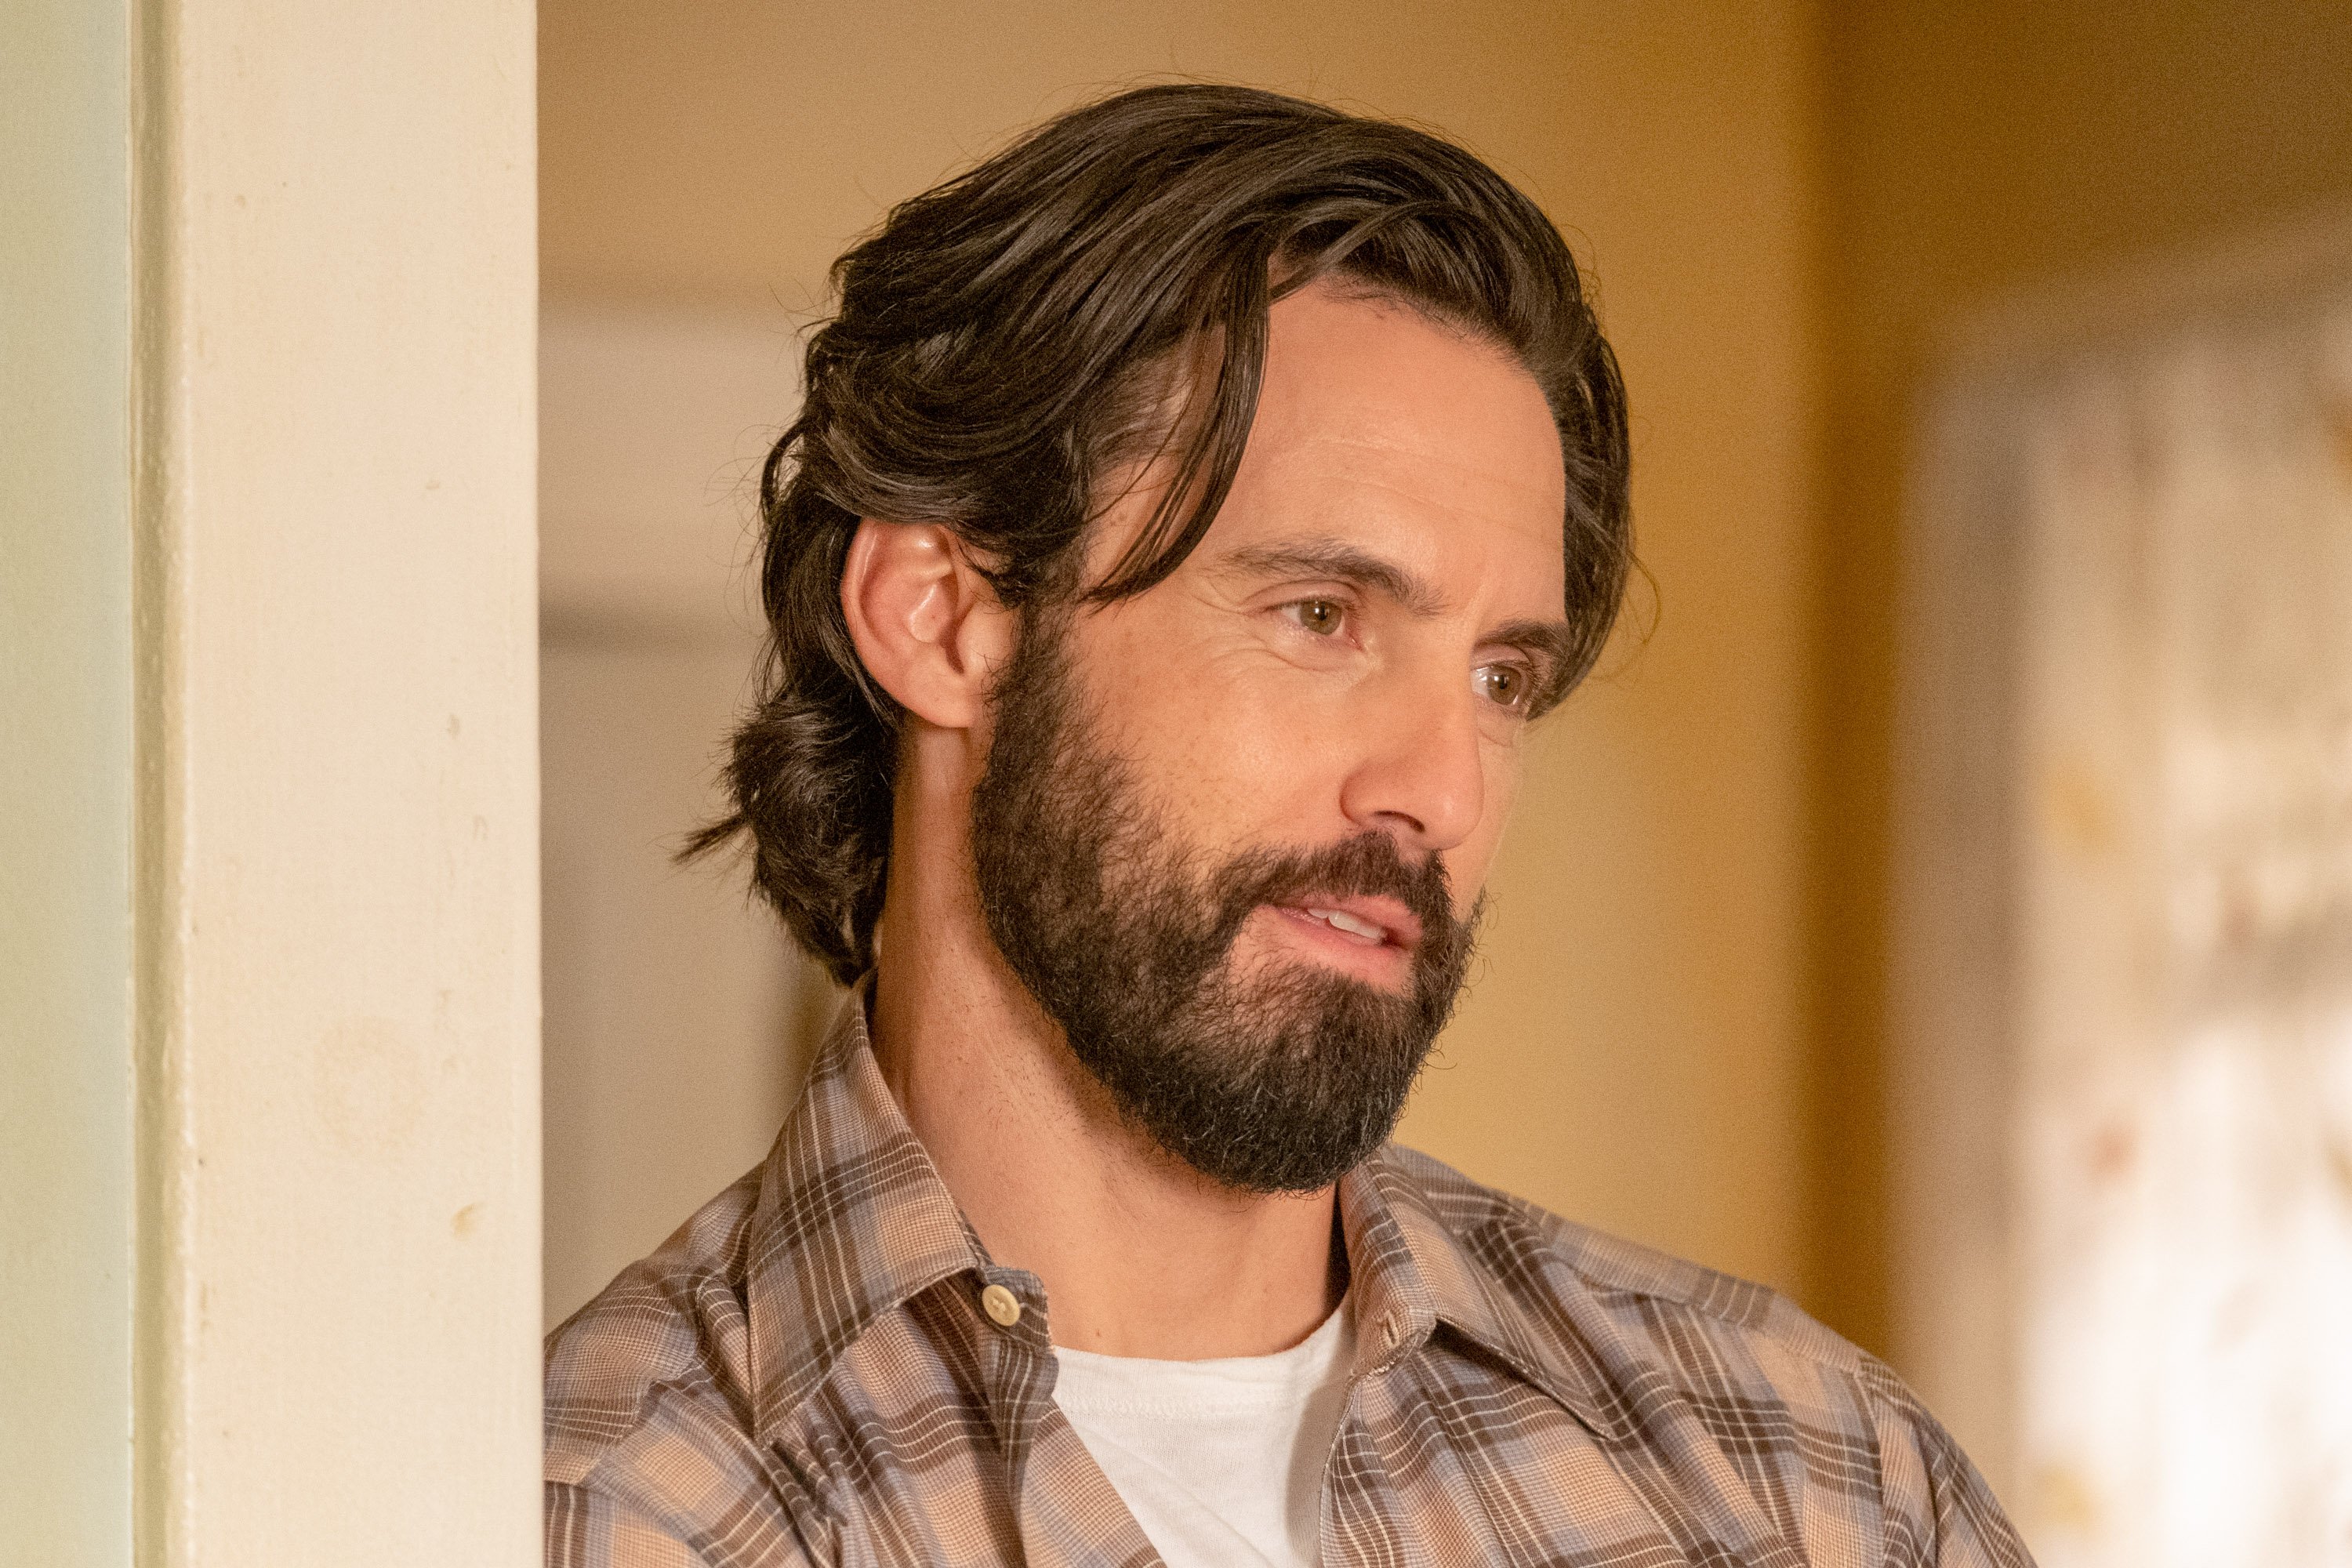 Milo Ventimiglia, in character as Jack Pearson in 'This Is Us' Season 6, wears a tan, brown, and blue plaid button-up shirt over a white shirt.